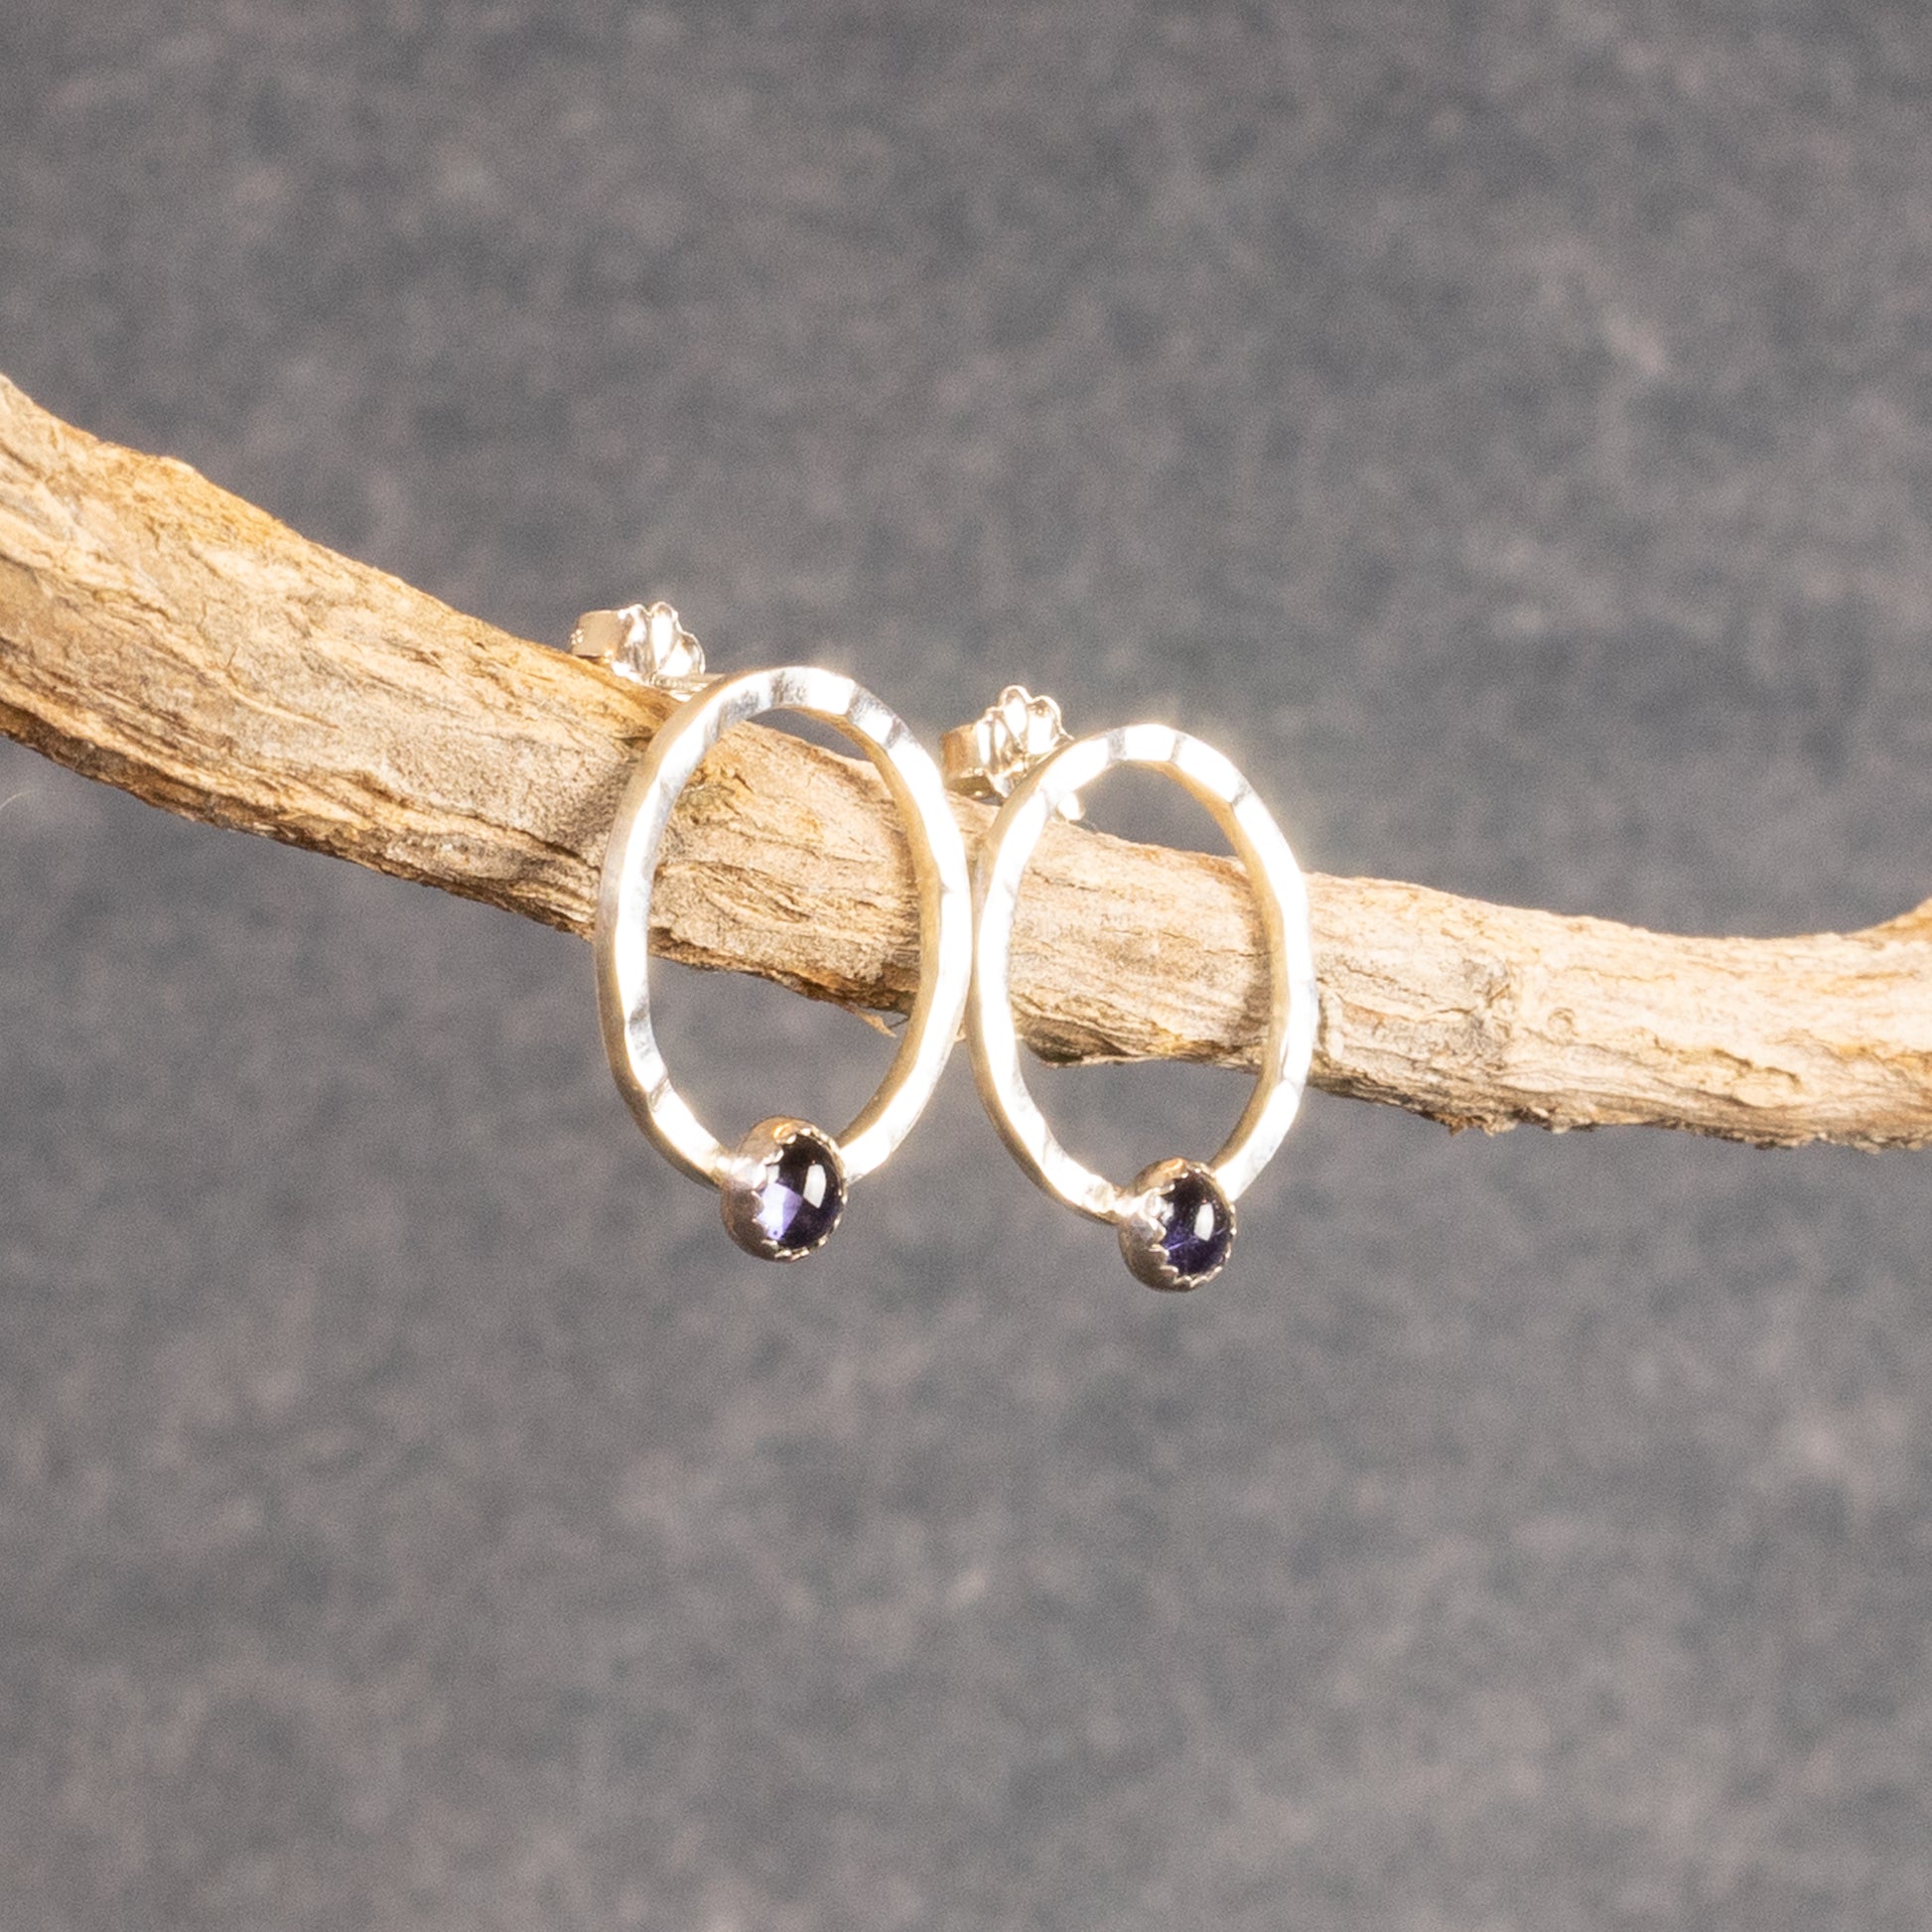 sterling silver 17-mm diameter textured circle earrings, each with a 4-mm iolite cabochon, perched on a tree branch turned to the right for an oblique view